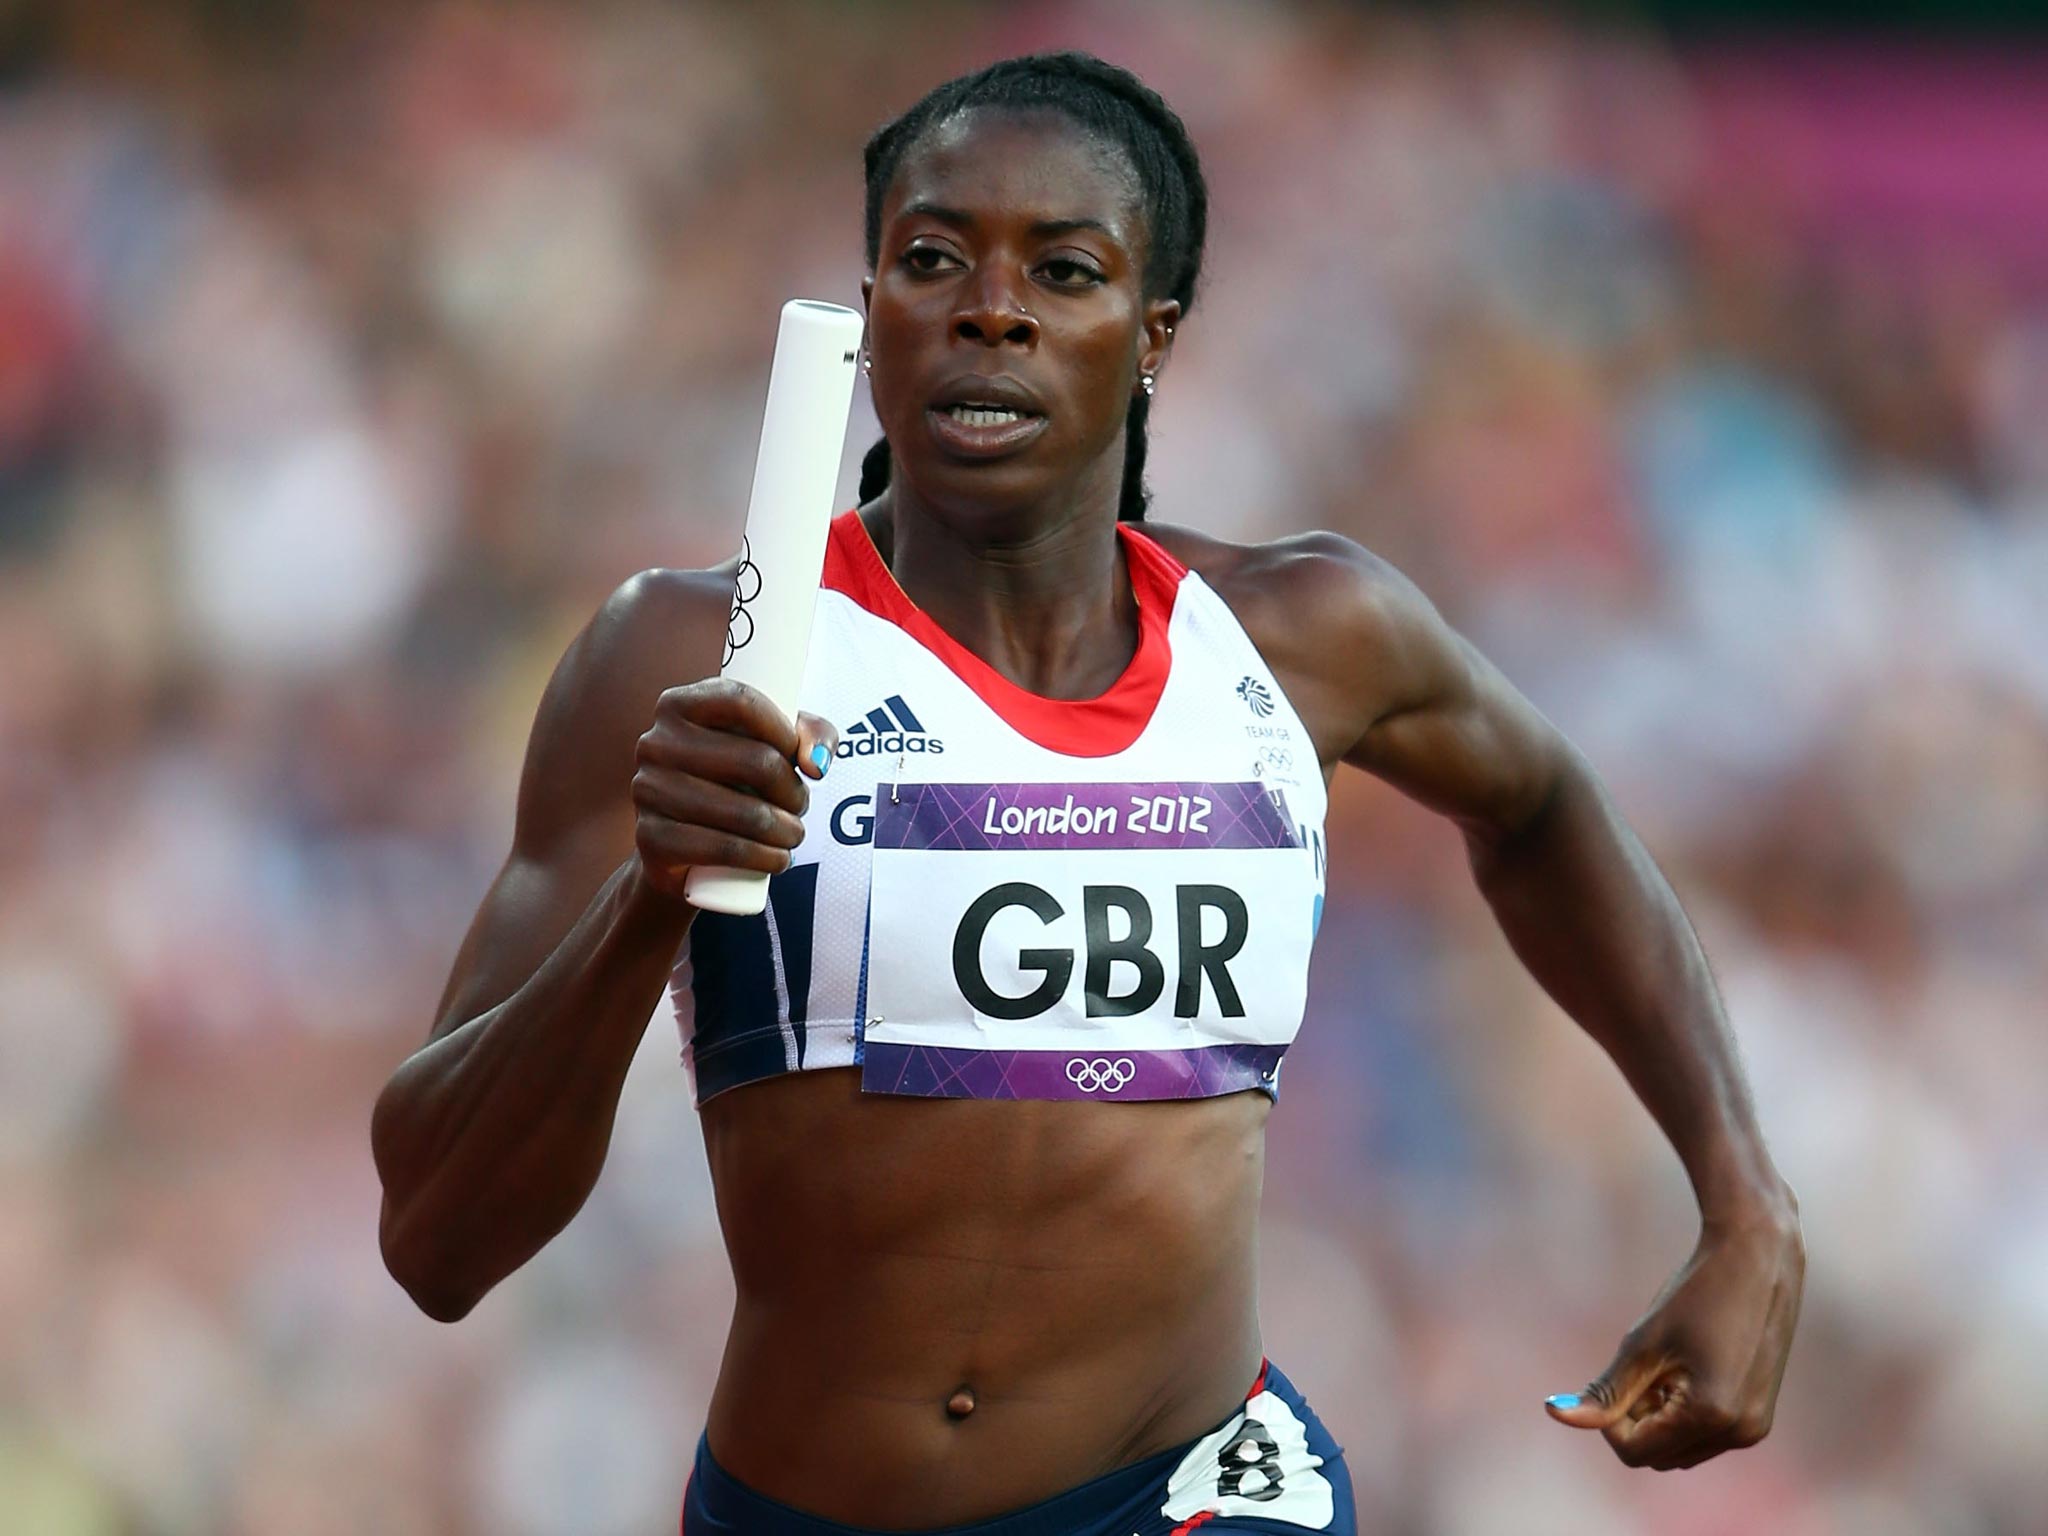 World champion Christine Ohuruogu competes in the 4x400m relay team who will attempt to defend their 2012 title